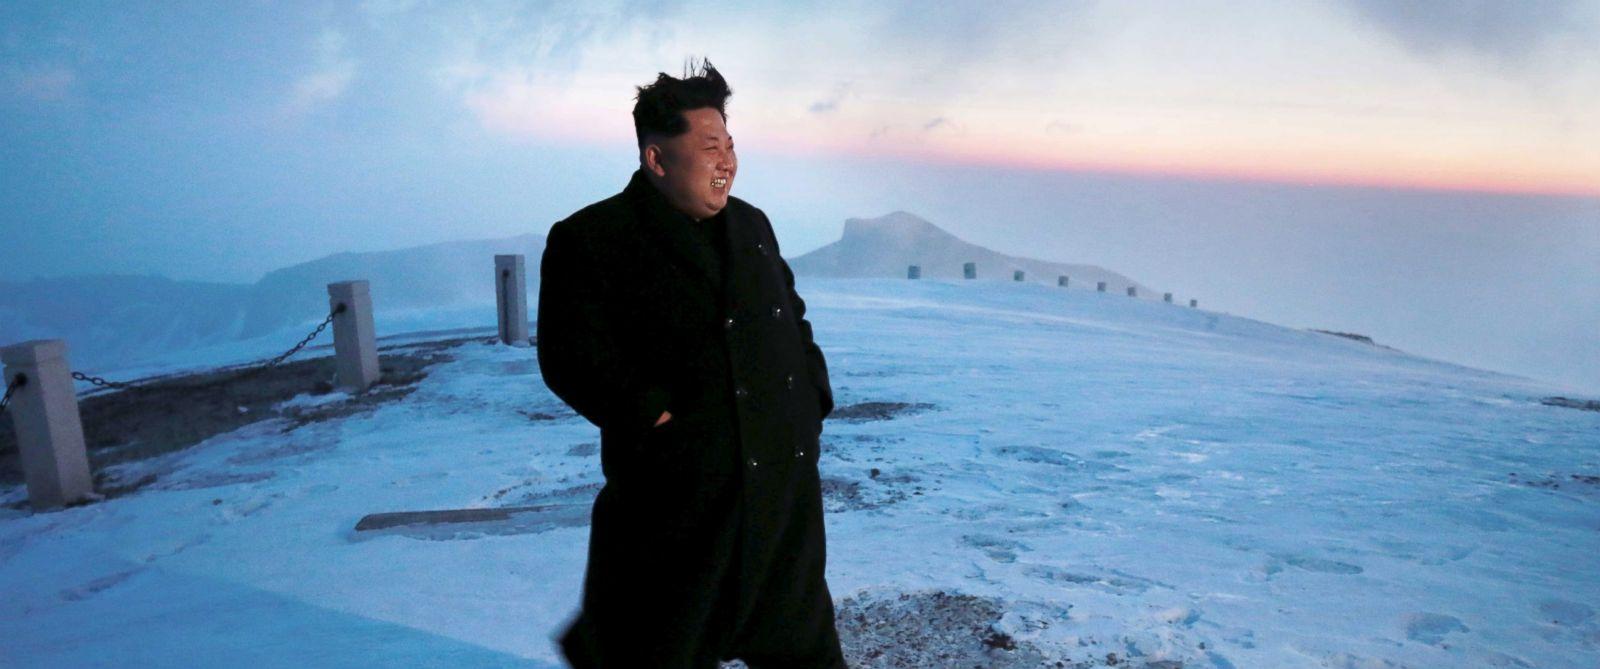 Kim Jong-Un after supposedly scaling the 9,000ft Mount Paektu one morning.